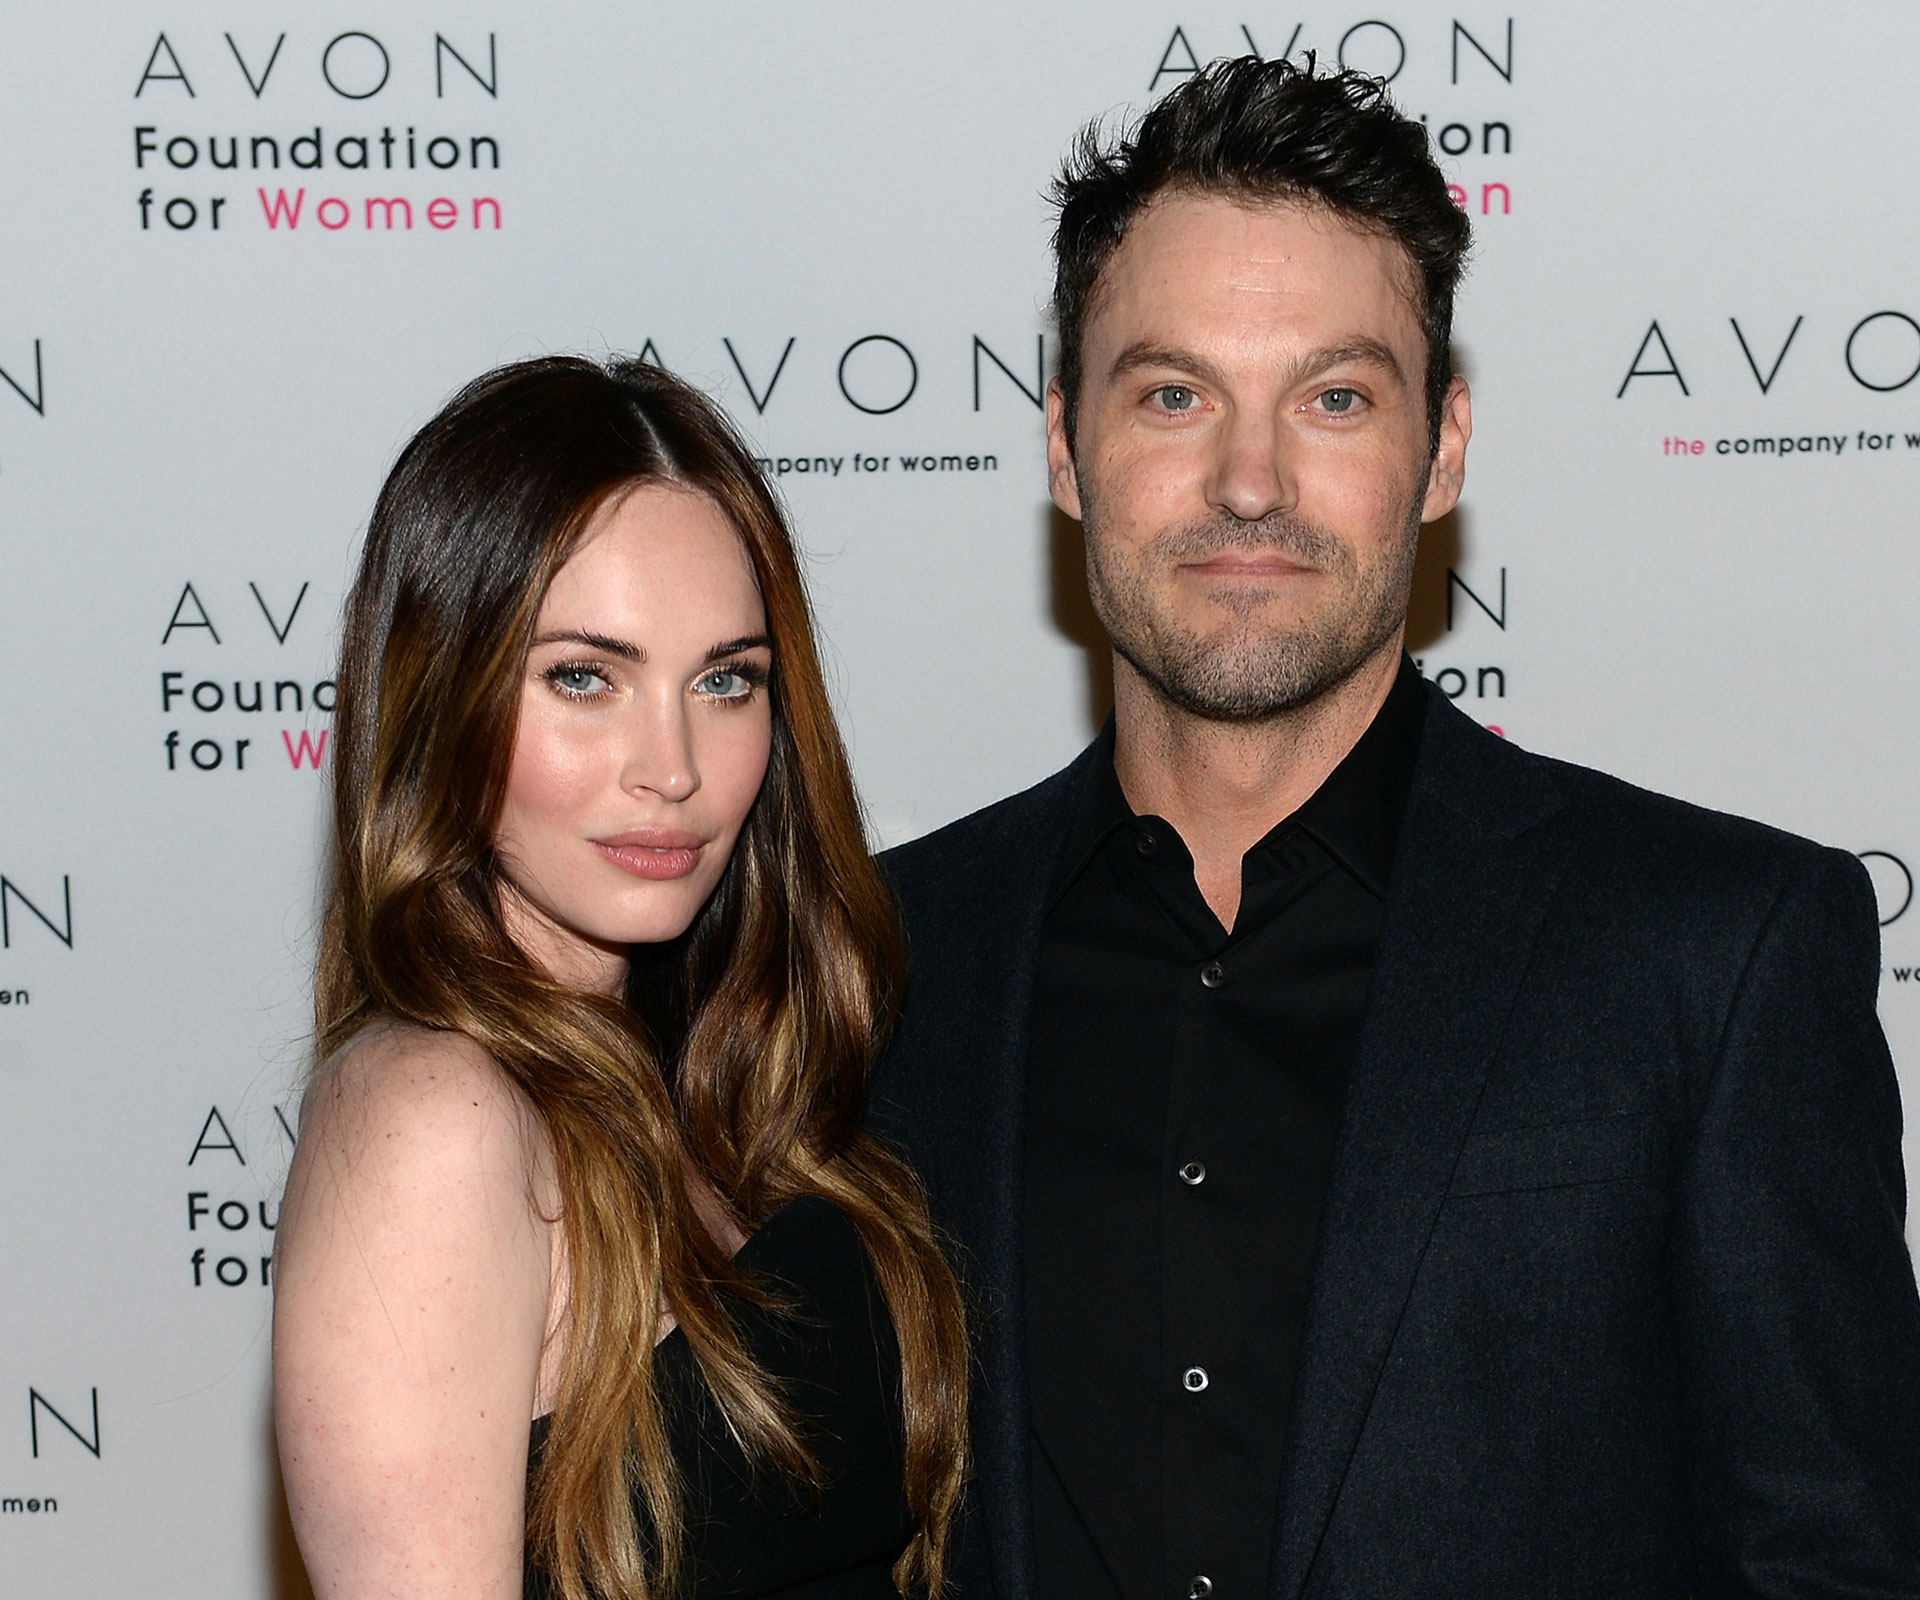 Megan Fox has given her third baby a name that’s not really a name